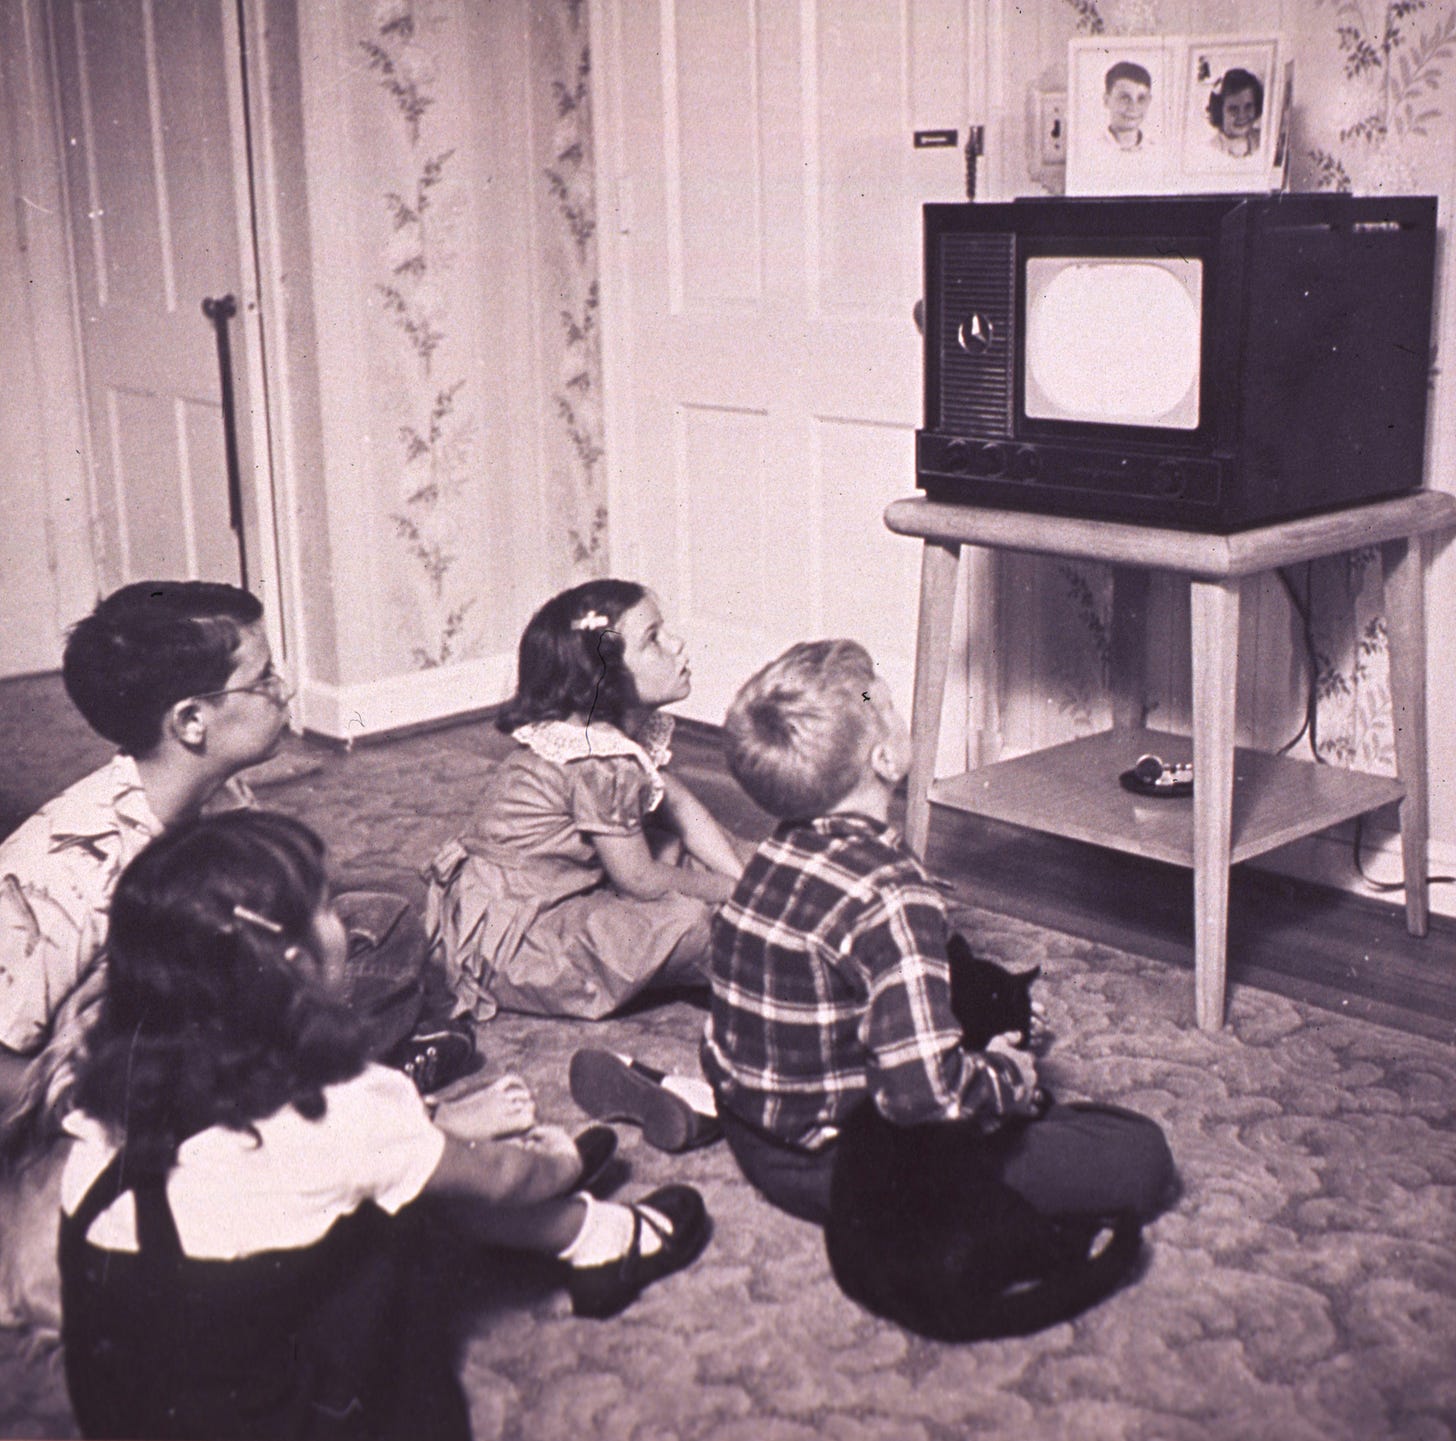 A black and white photo of a group of young children sitting in front of an old TV